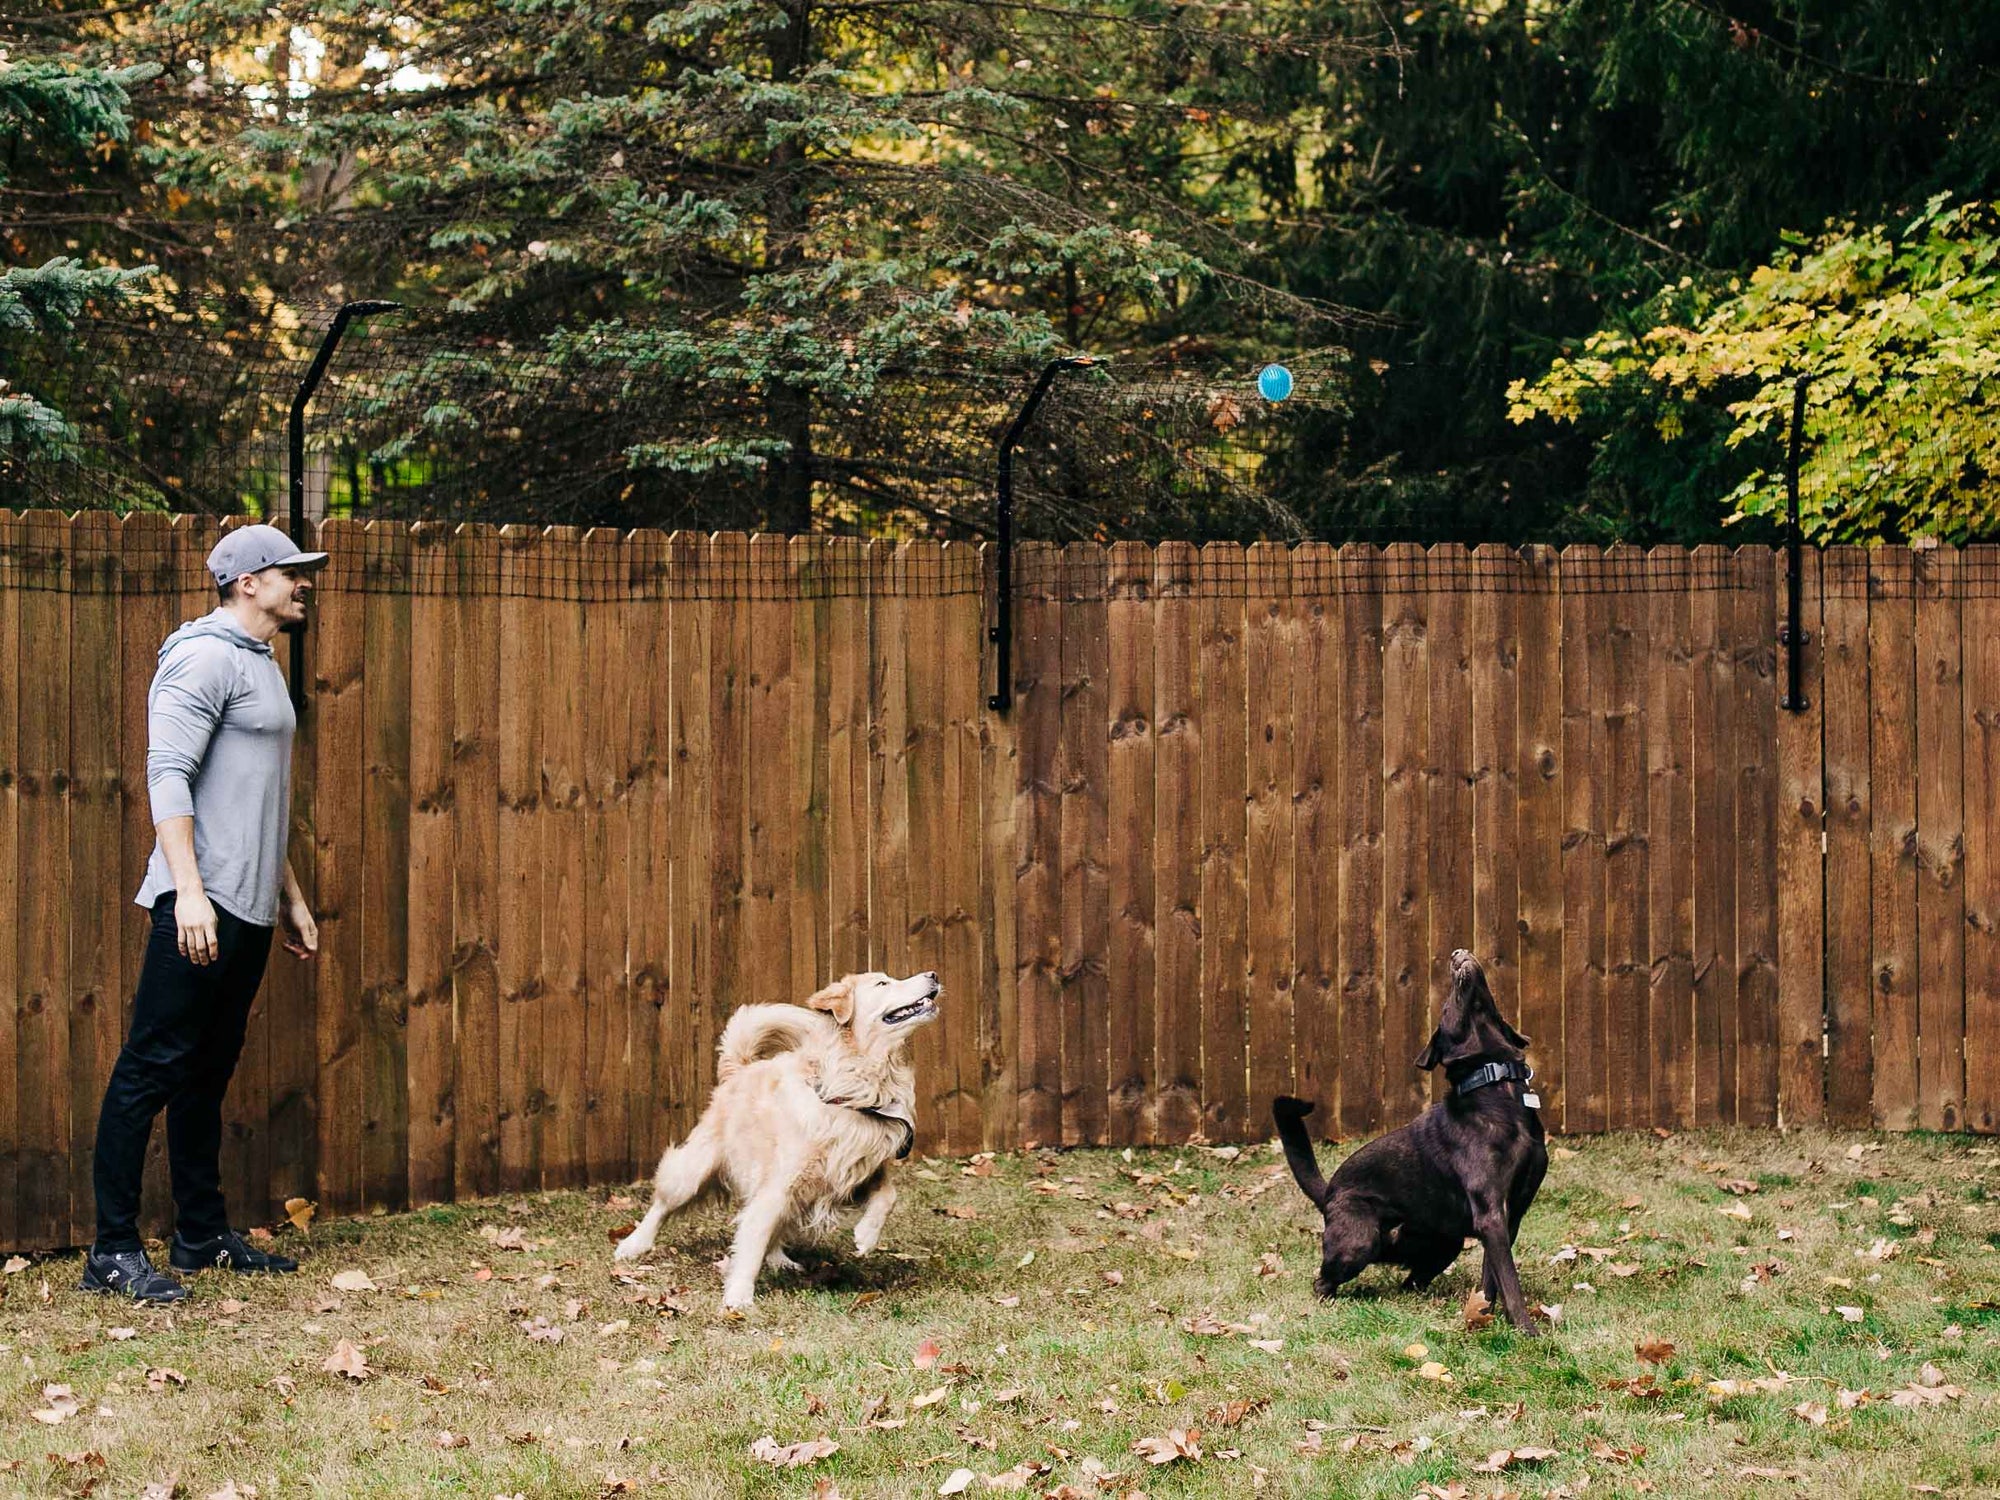 Man in backyard with dogs and dog proofer